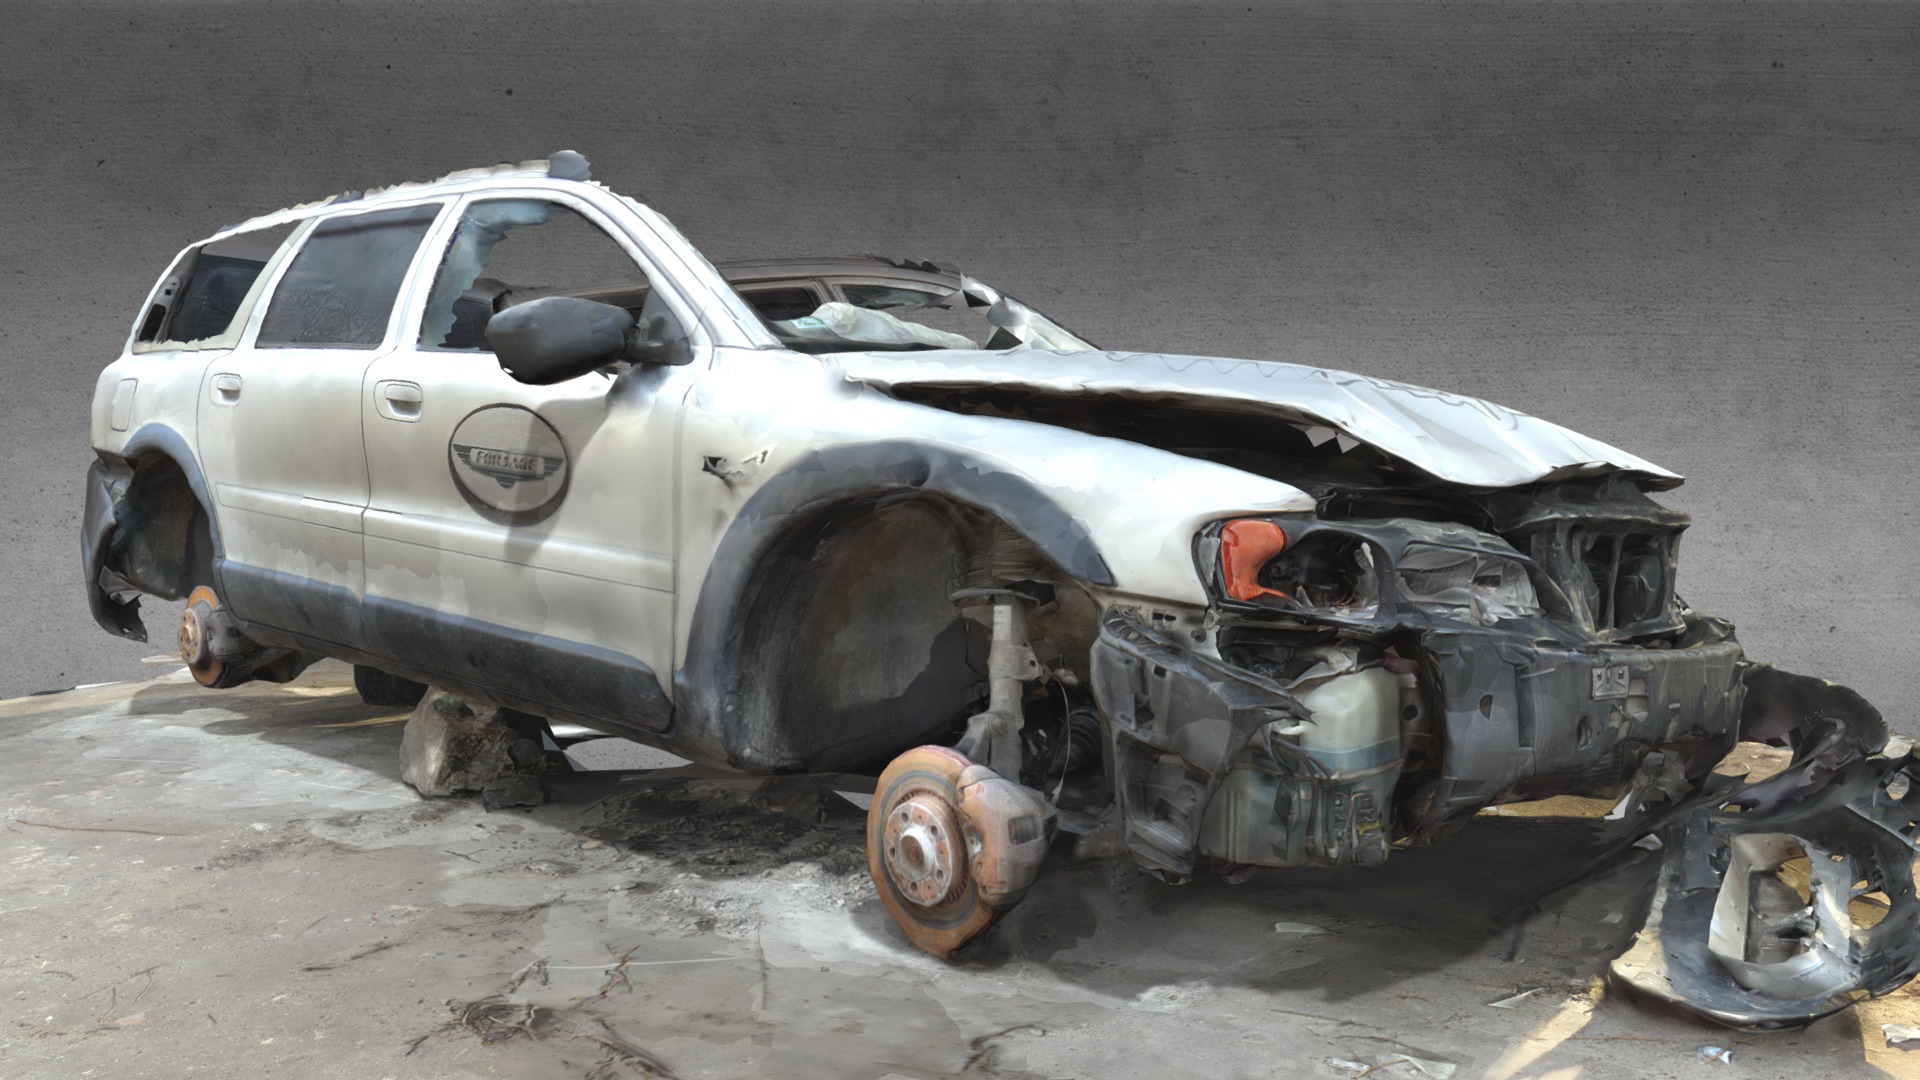 3D model Volvo car wreck - This is a 3D model of the Volvo car wreck. The 3D model is about a car that has been involved in a accident.